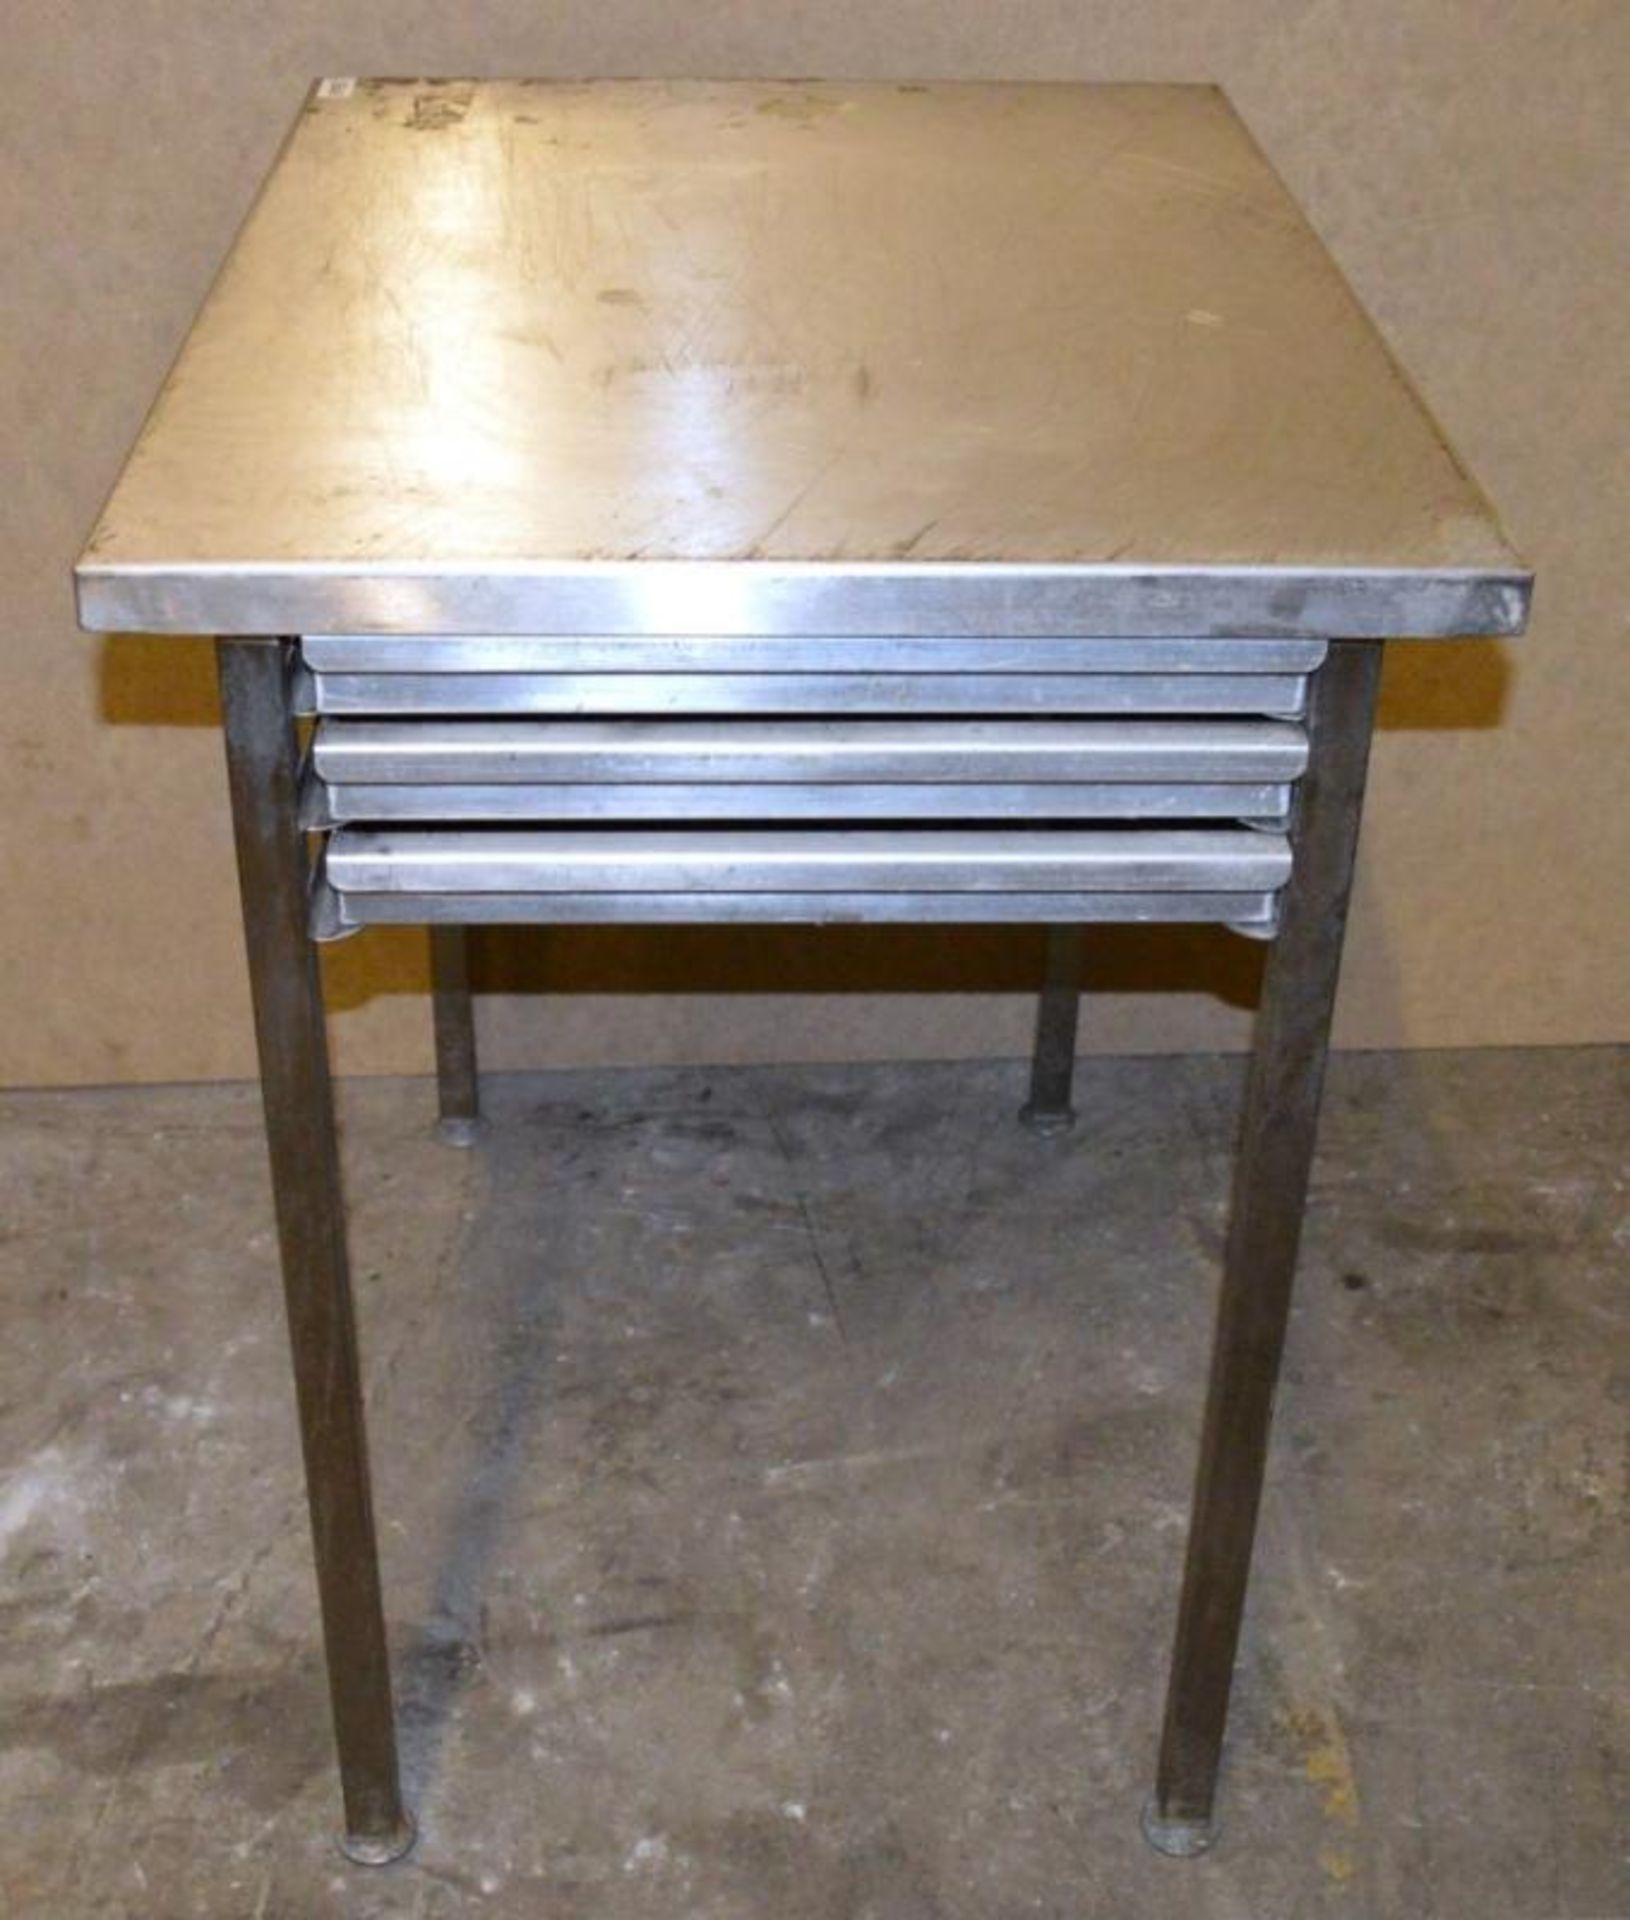 1 x Stainless Steel Bakers Preperation Table With Integrated Drawer System and Three Drawers - H87 x - Image 2 of 5